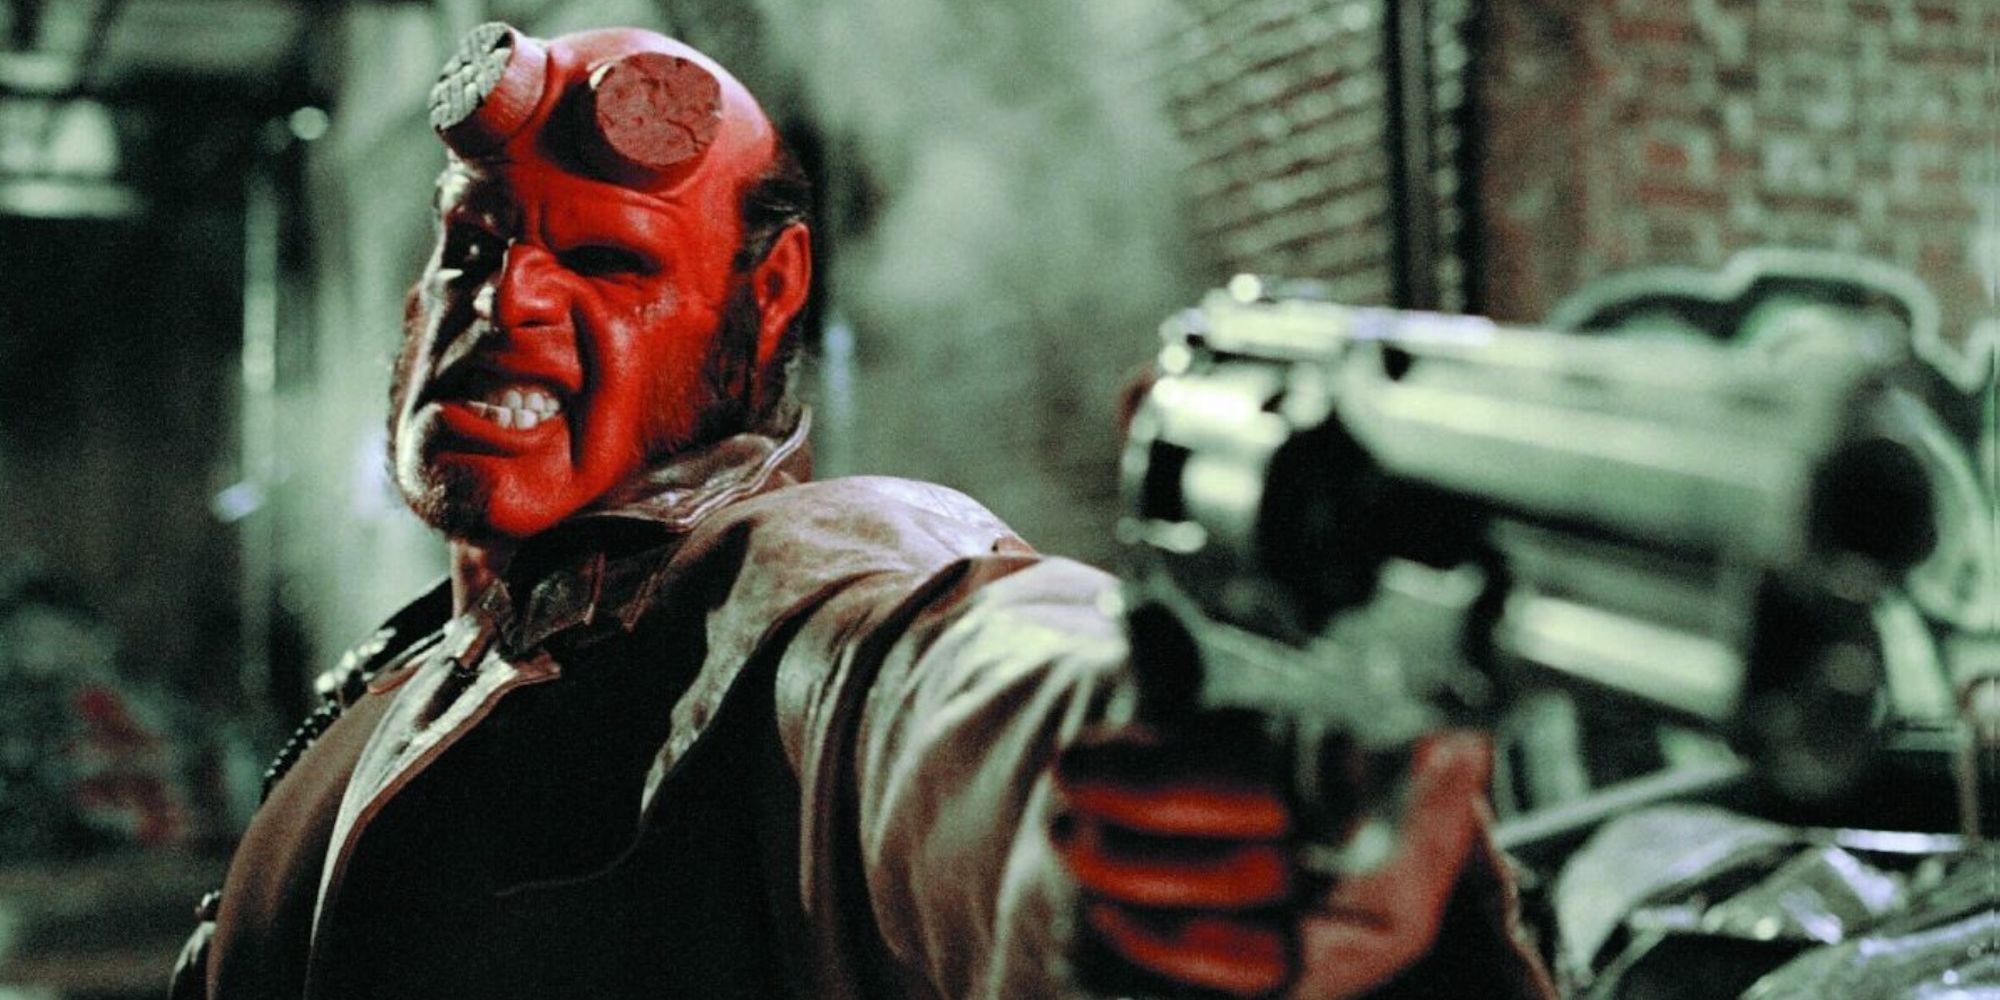 Ron Perlman as Hellboy holding a revolver